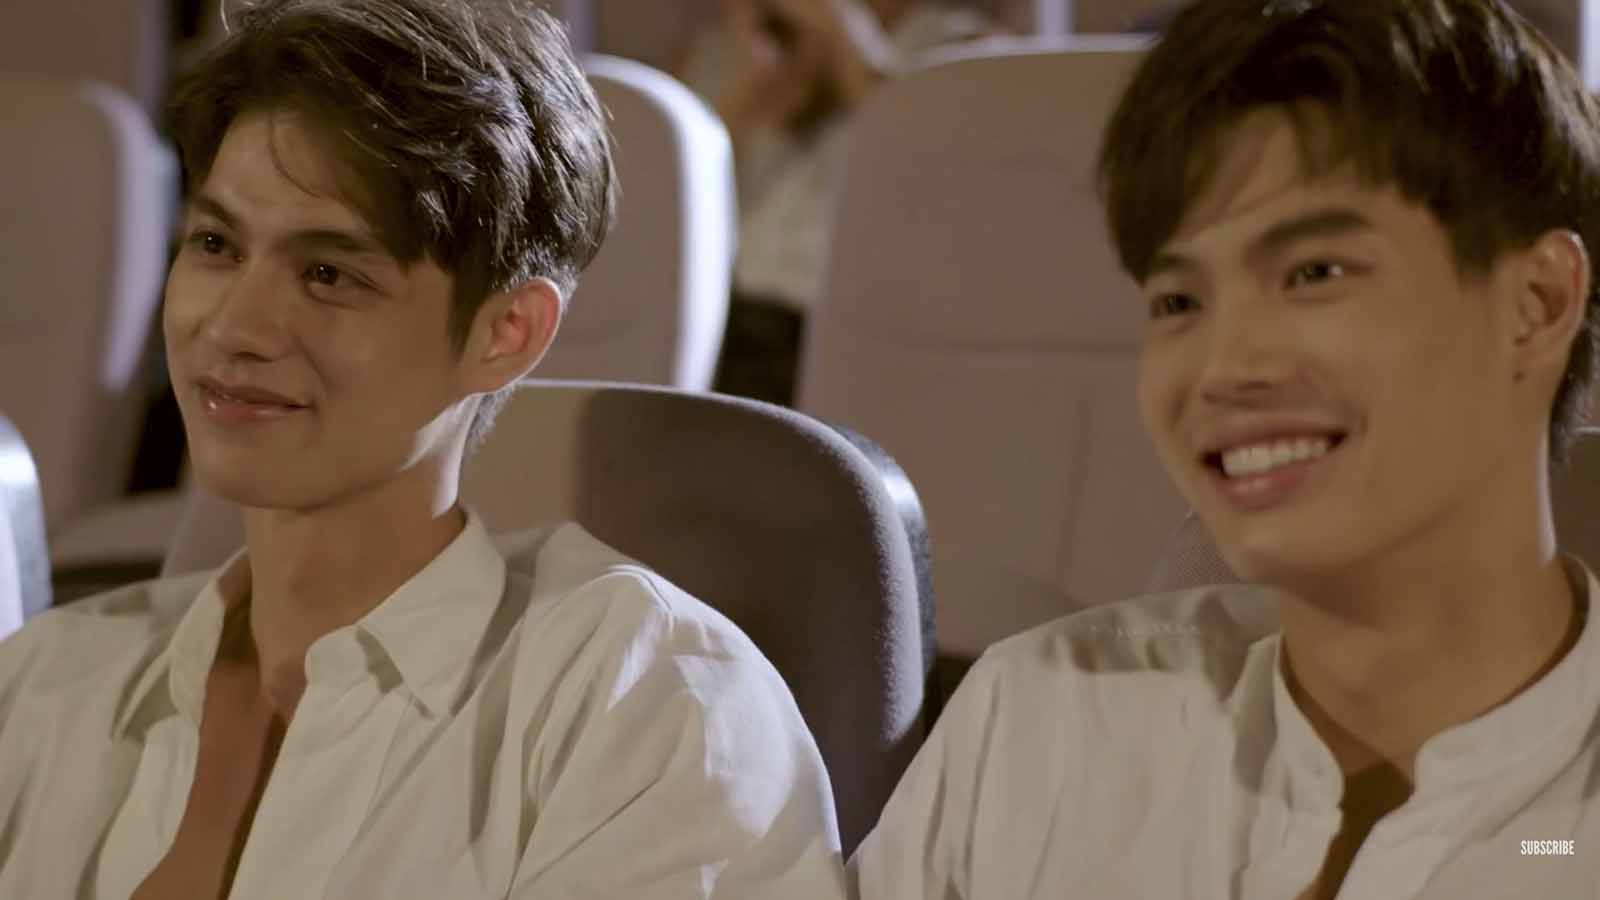 If you've managed to miss out on the '2gether' hype train until now, there's still time. Here's why you need to catch up on the lastest Thai boy love drama.